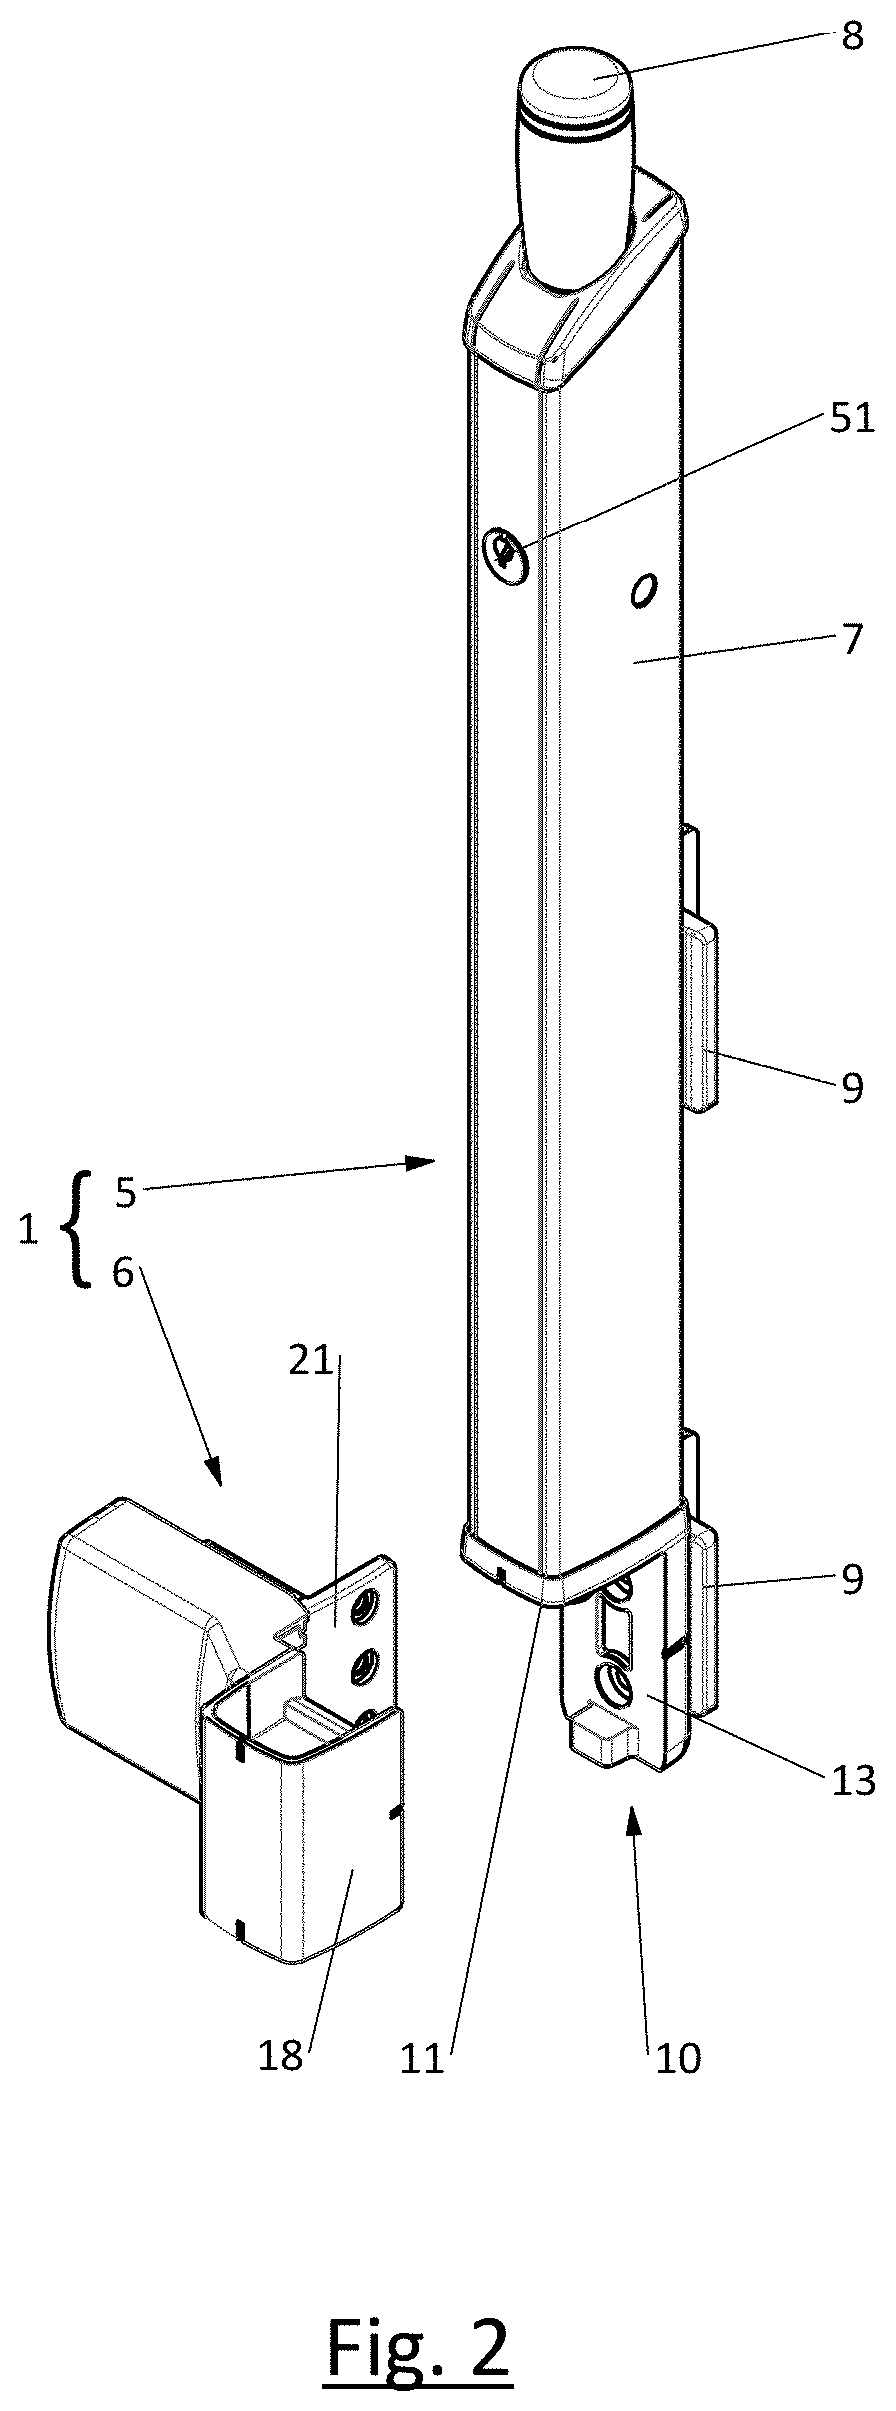 Magnetic latch for fastening a hinged closure member to a support